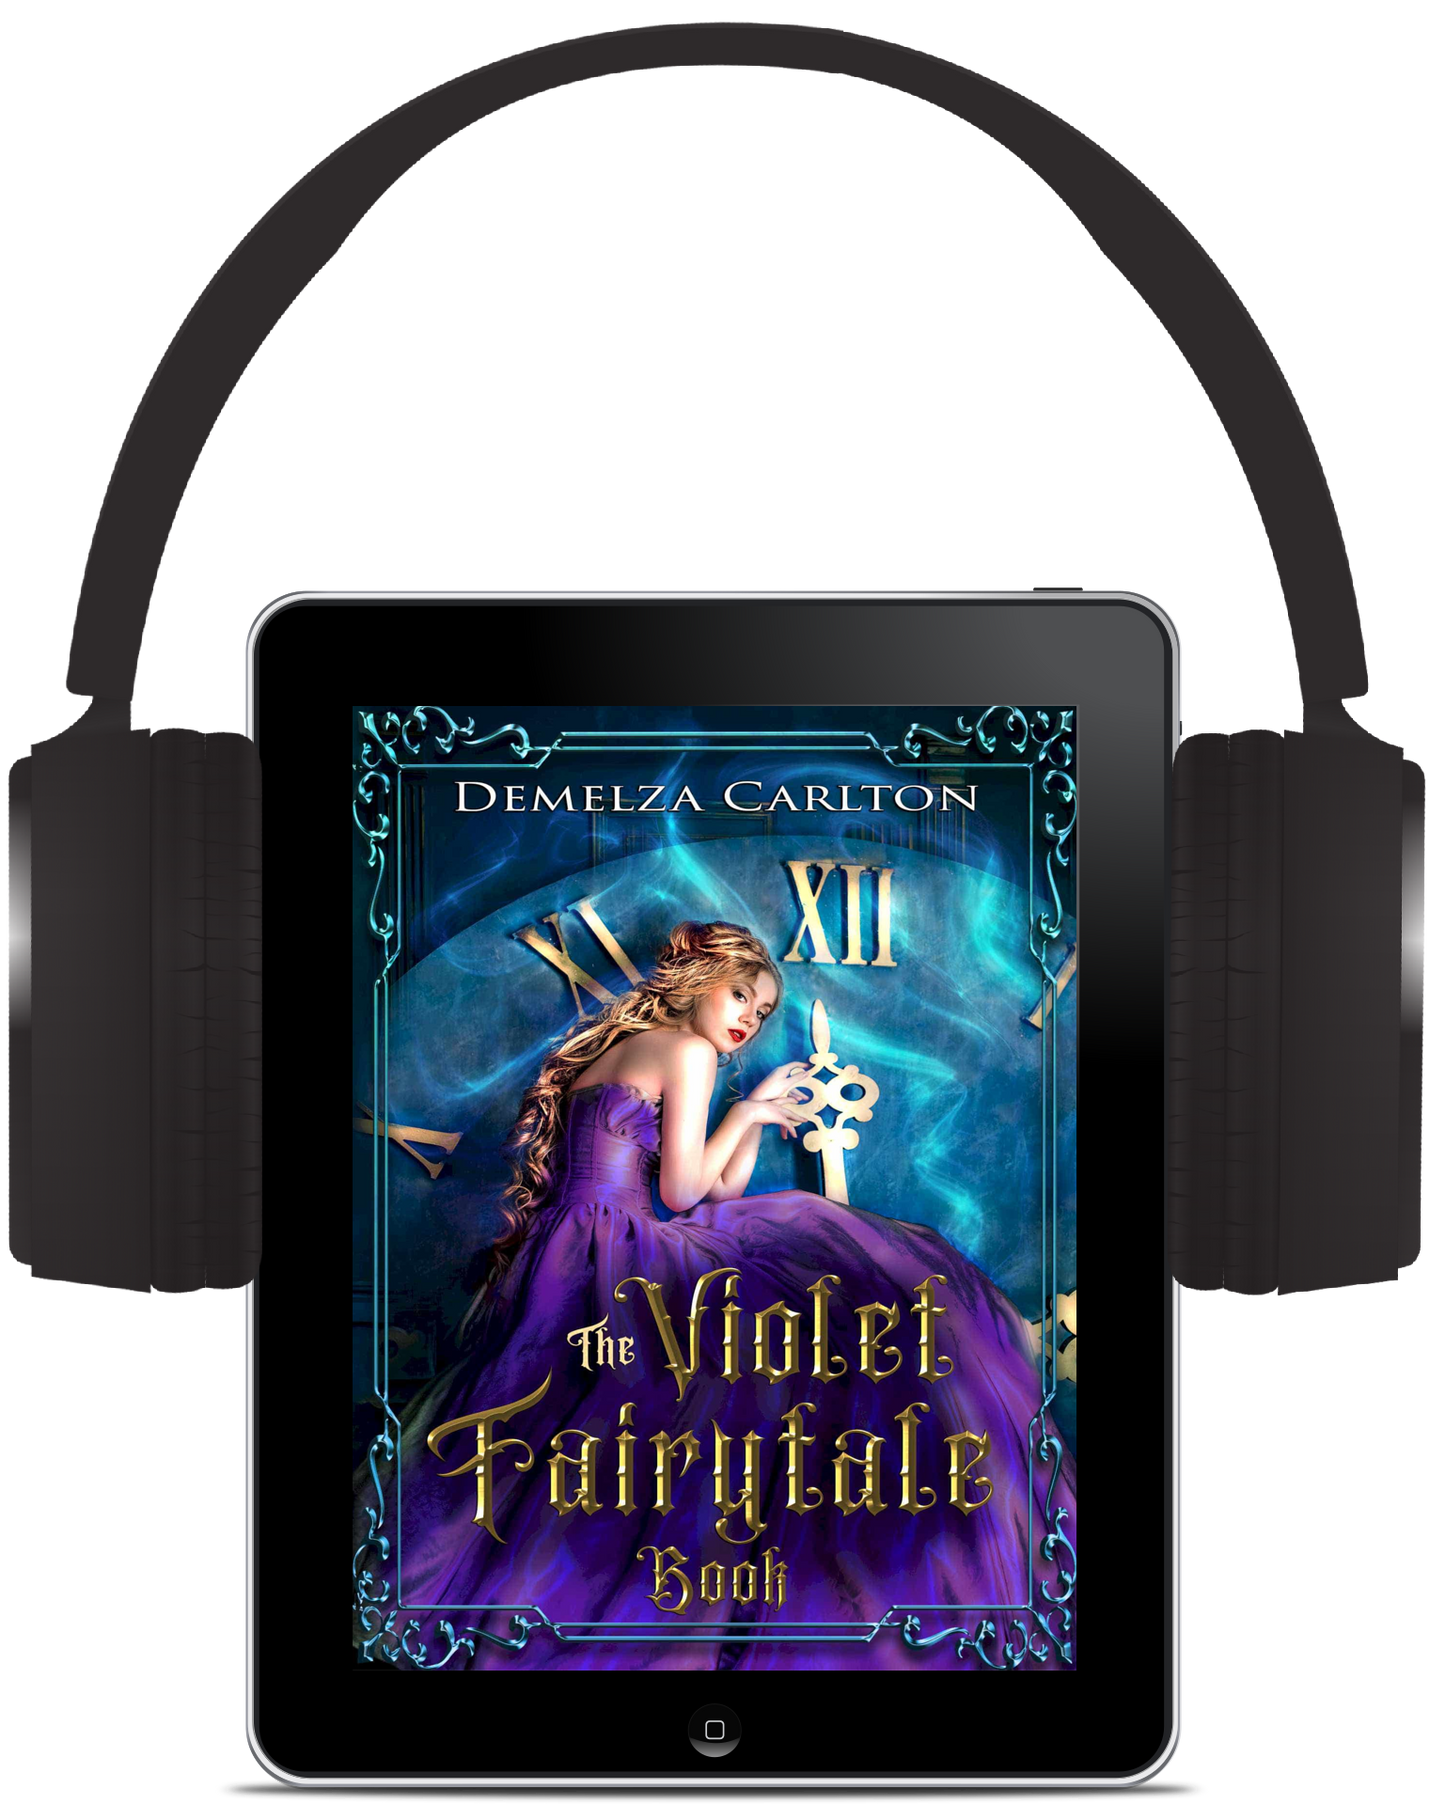 The Violet Fairytale Book (Book 19-23 in the Romance a Medieval Fairytale series) AUDIOBOOK